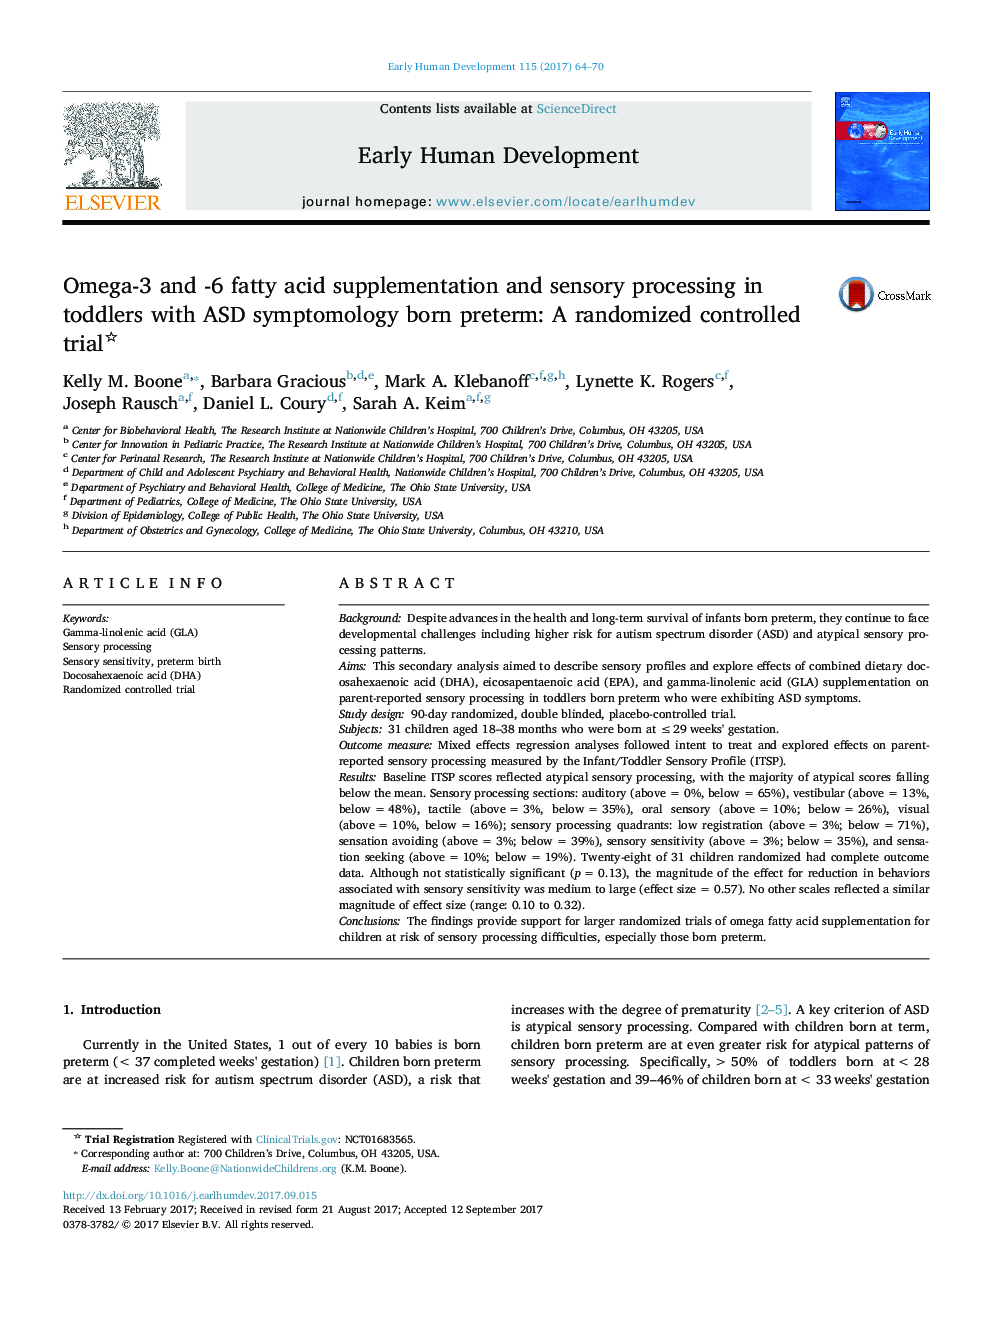 Omega-3 and -6 fatty acid supplementation and sensory processing in toddlers with ASD symptomology born preterm: A randomized controlled trial